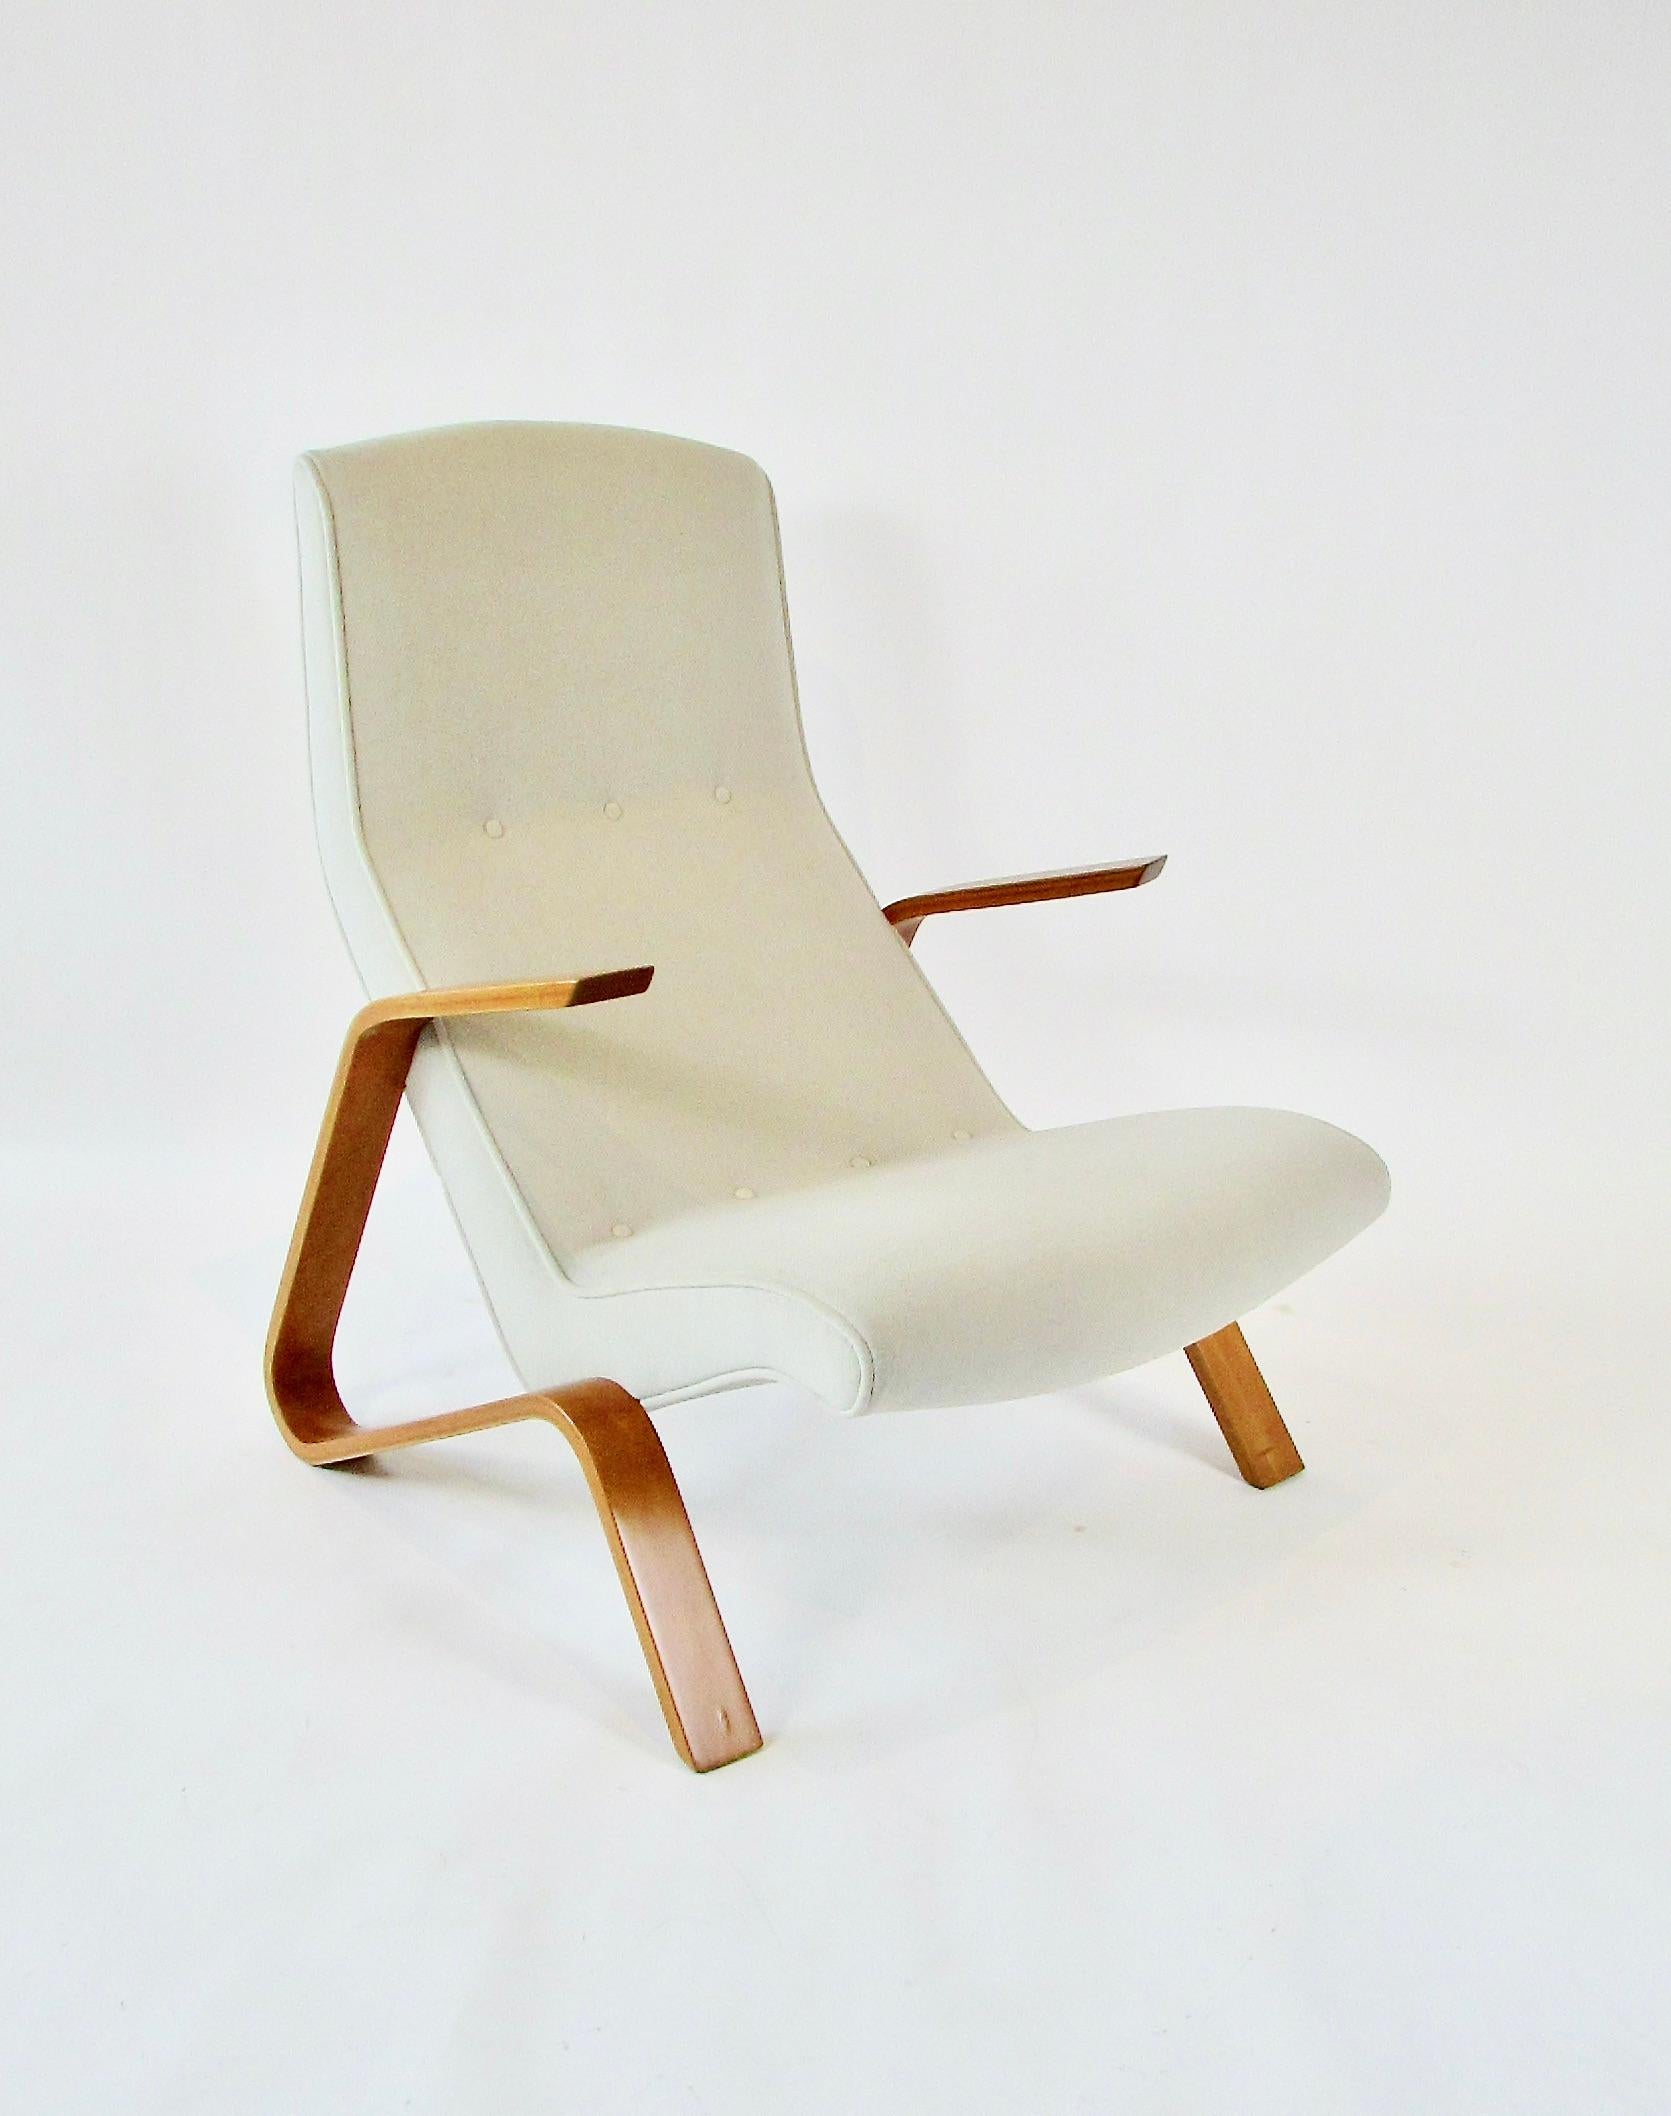 20th Century Properly Restored Early Production Eero Saarinen Grasshopper Chair for Knoll For Sale